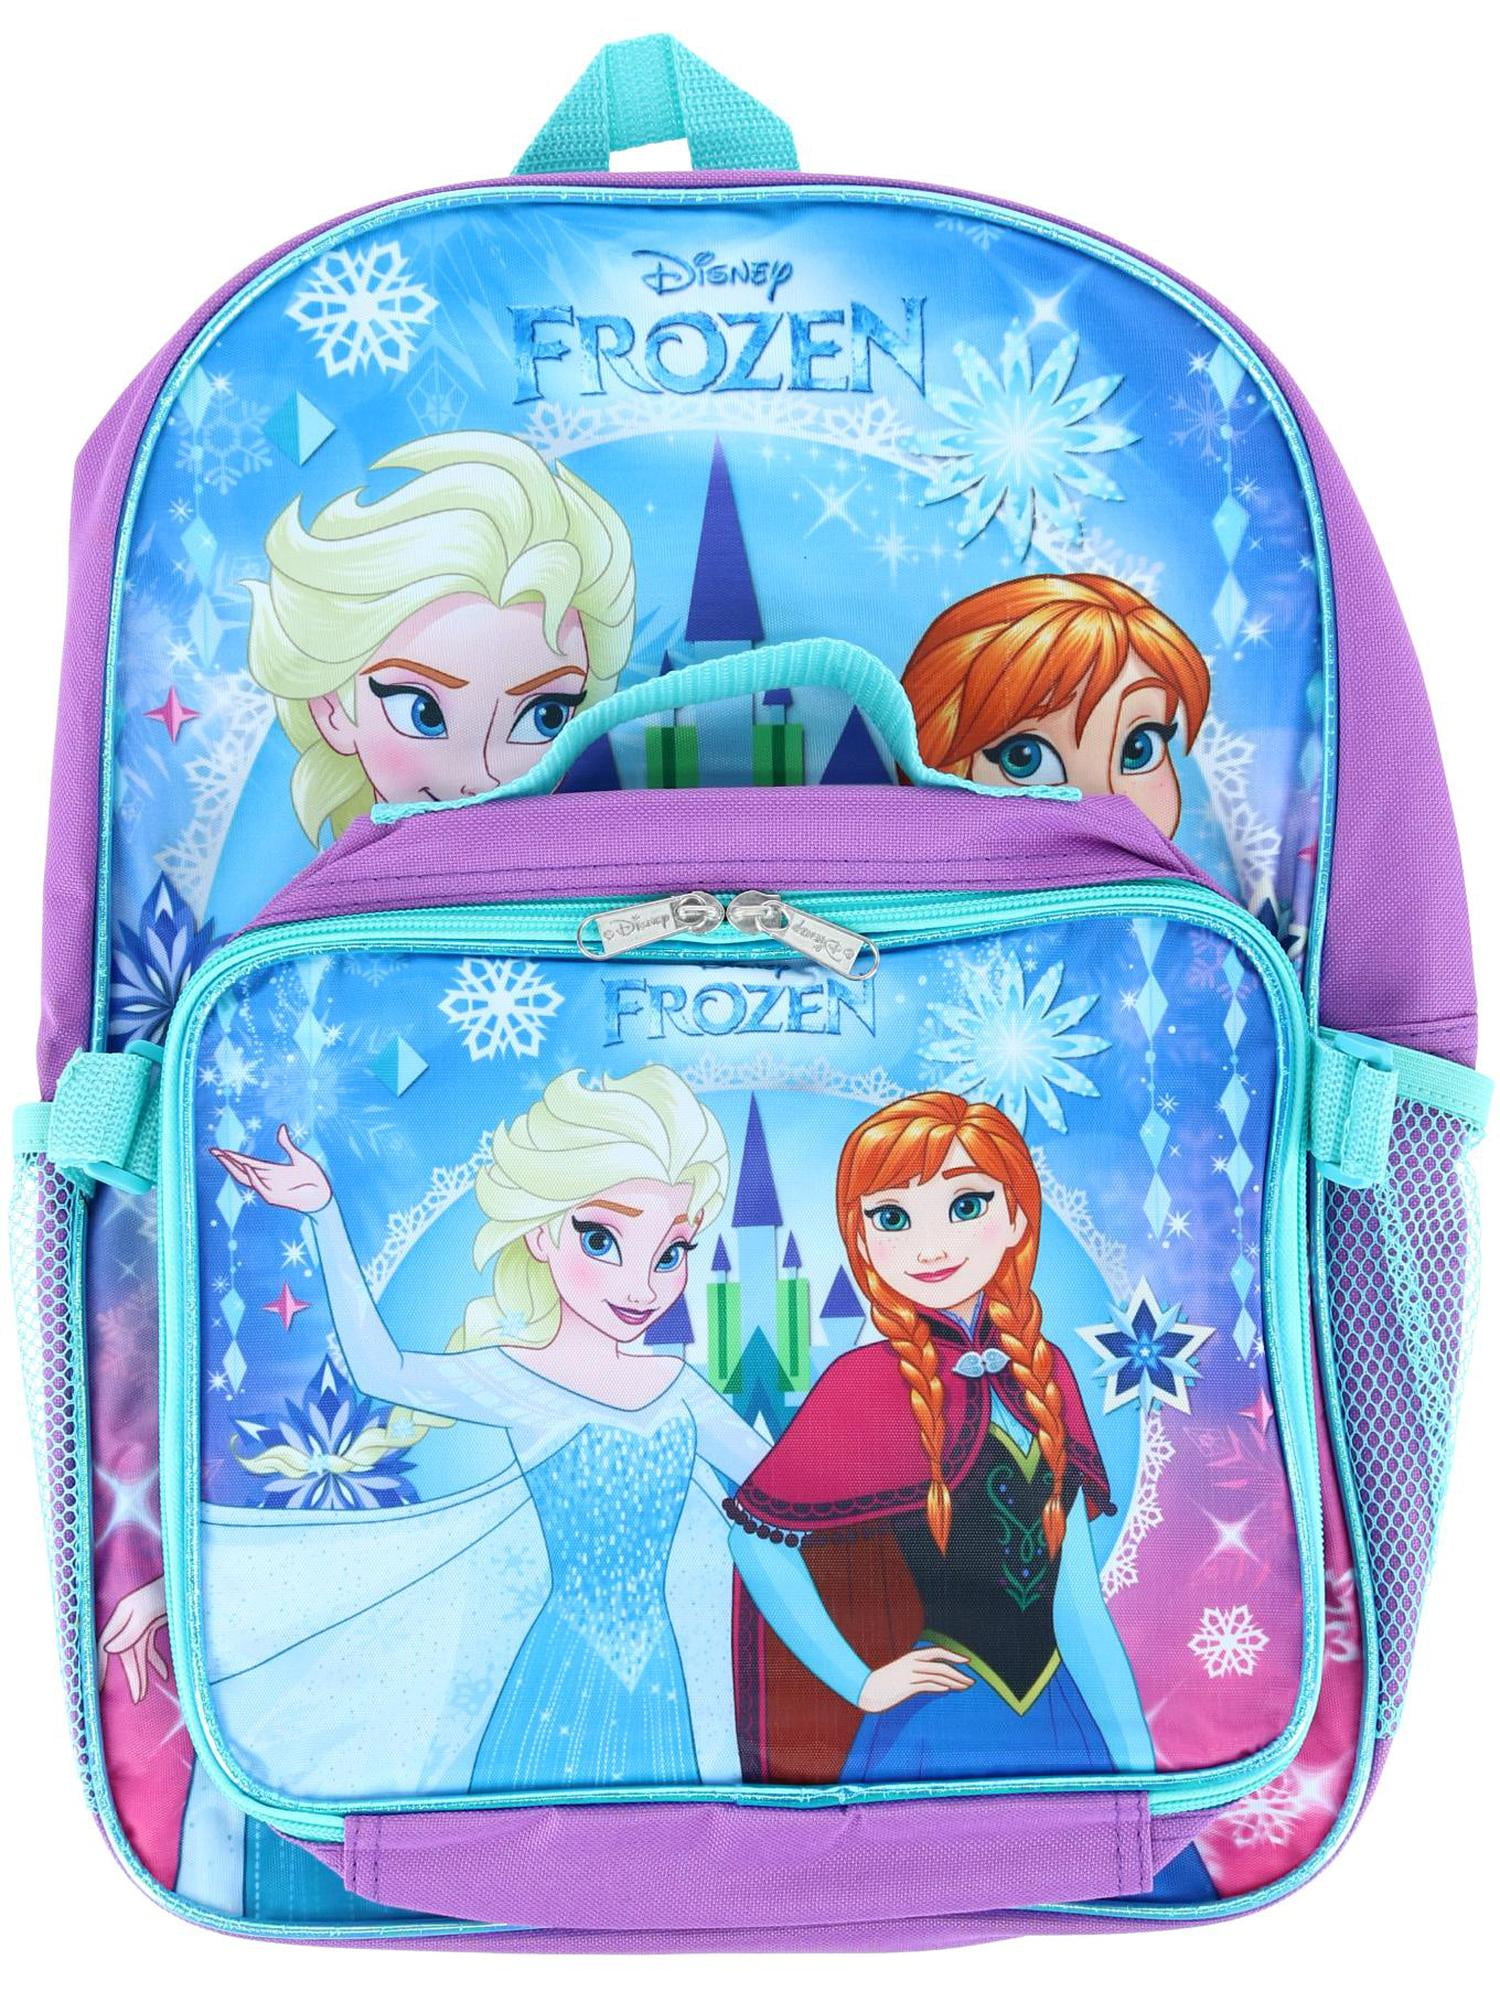 Packing for the Holidays w/ Frozen Luggage from American Tourister